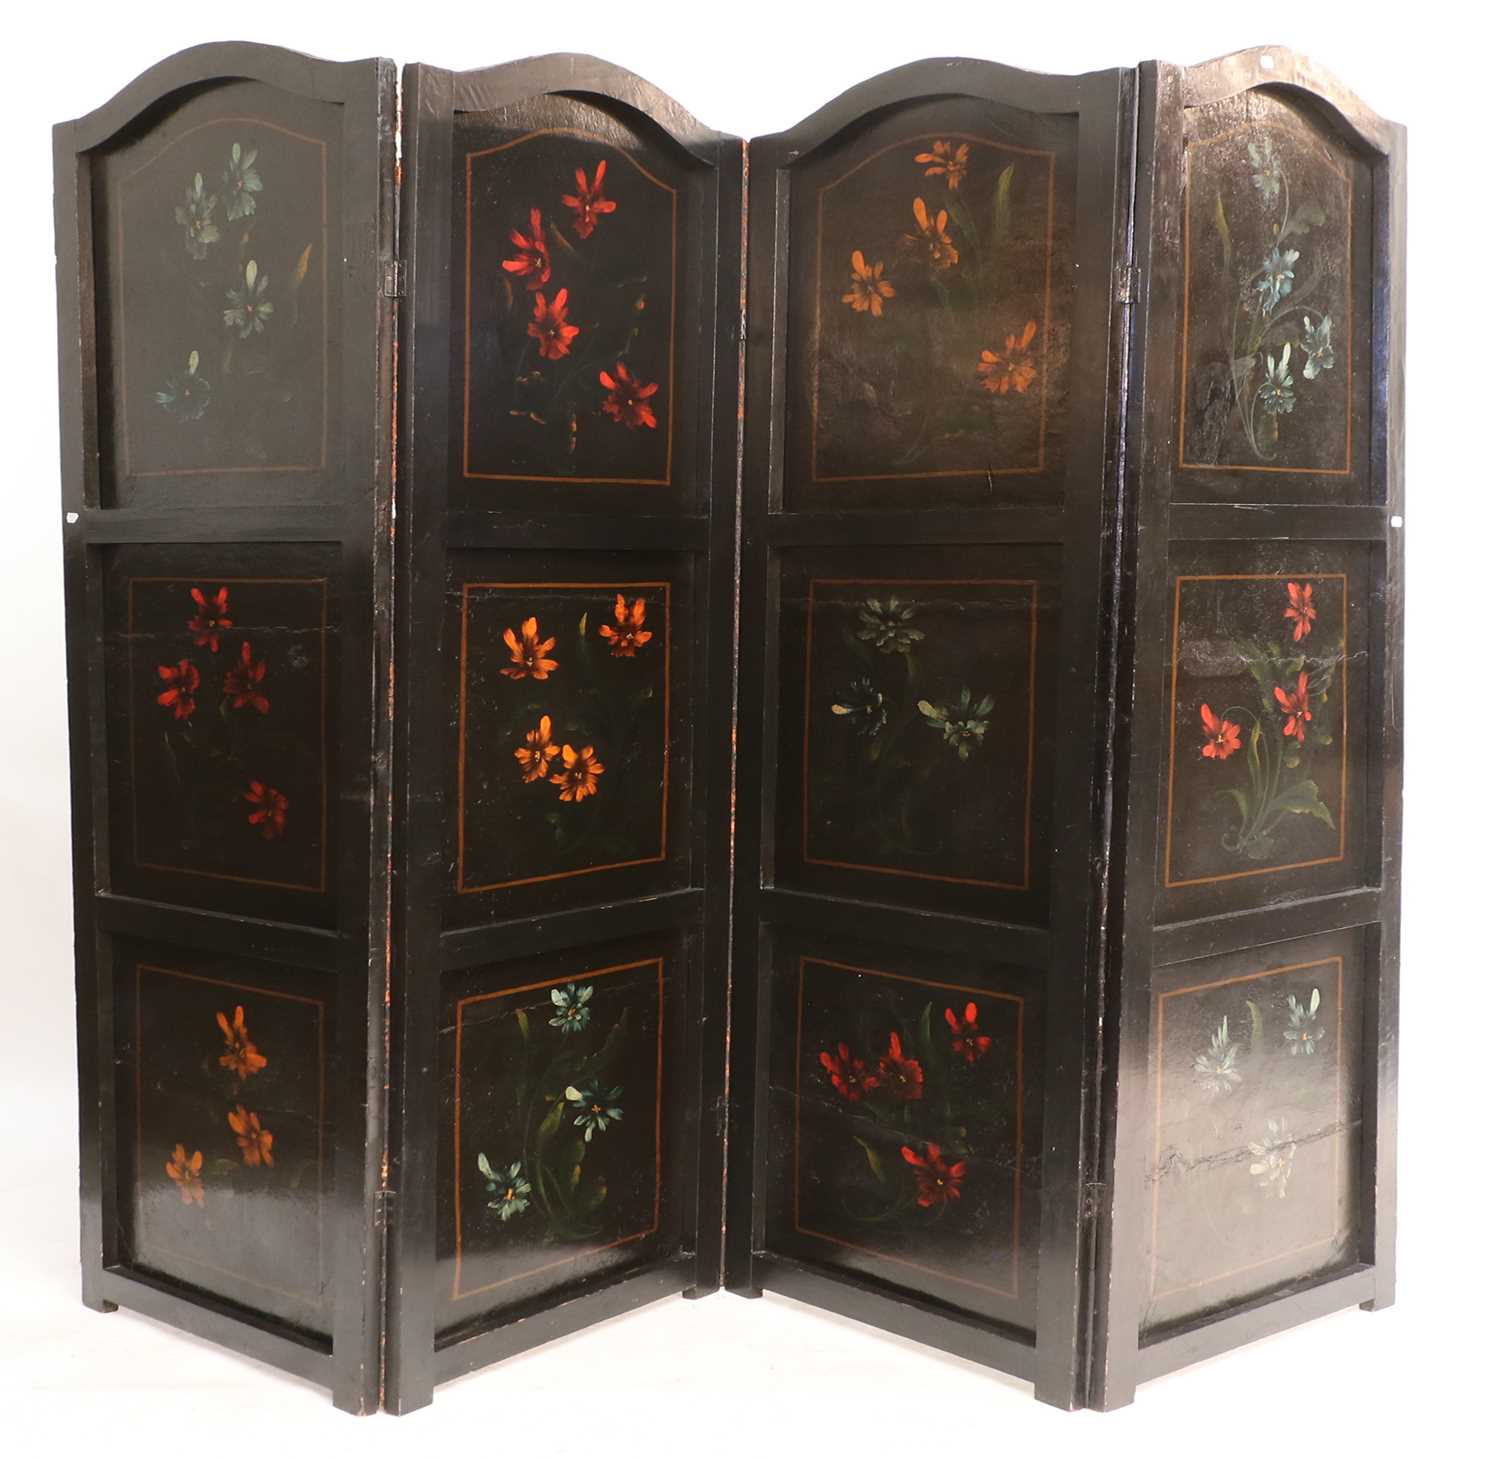 A Victorian Four-Leaf Close-Nailed and Painted Dressing Screen, mid 19th century, one side painted - Image 4 of 4